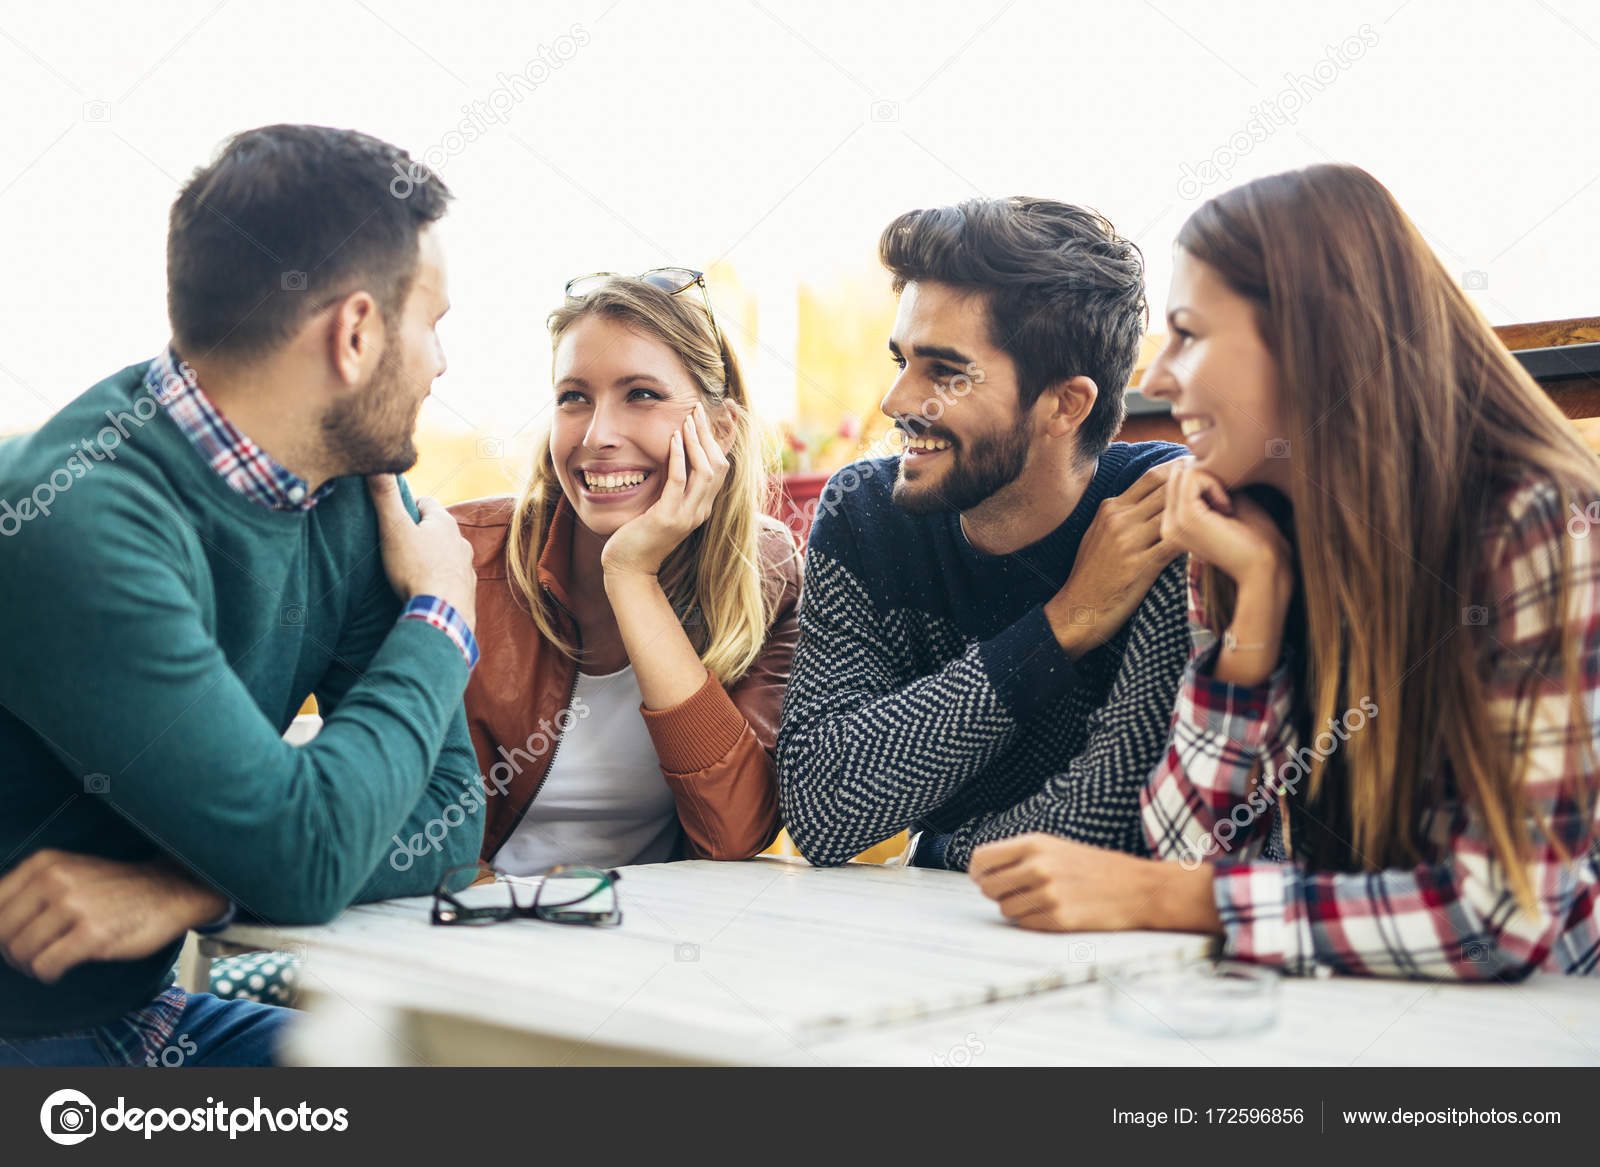 Group of four friends having fun a coffee together. Two women an ...